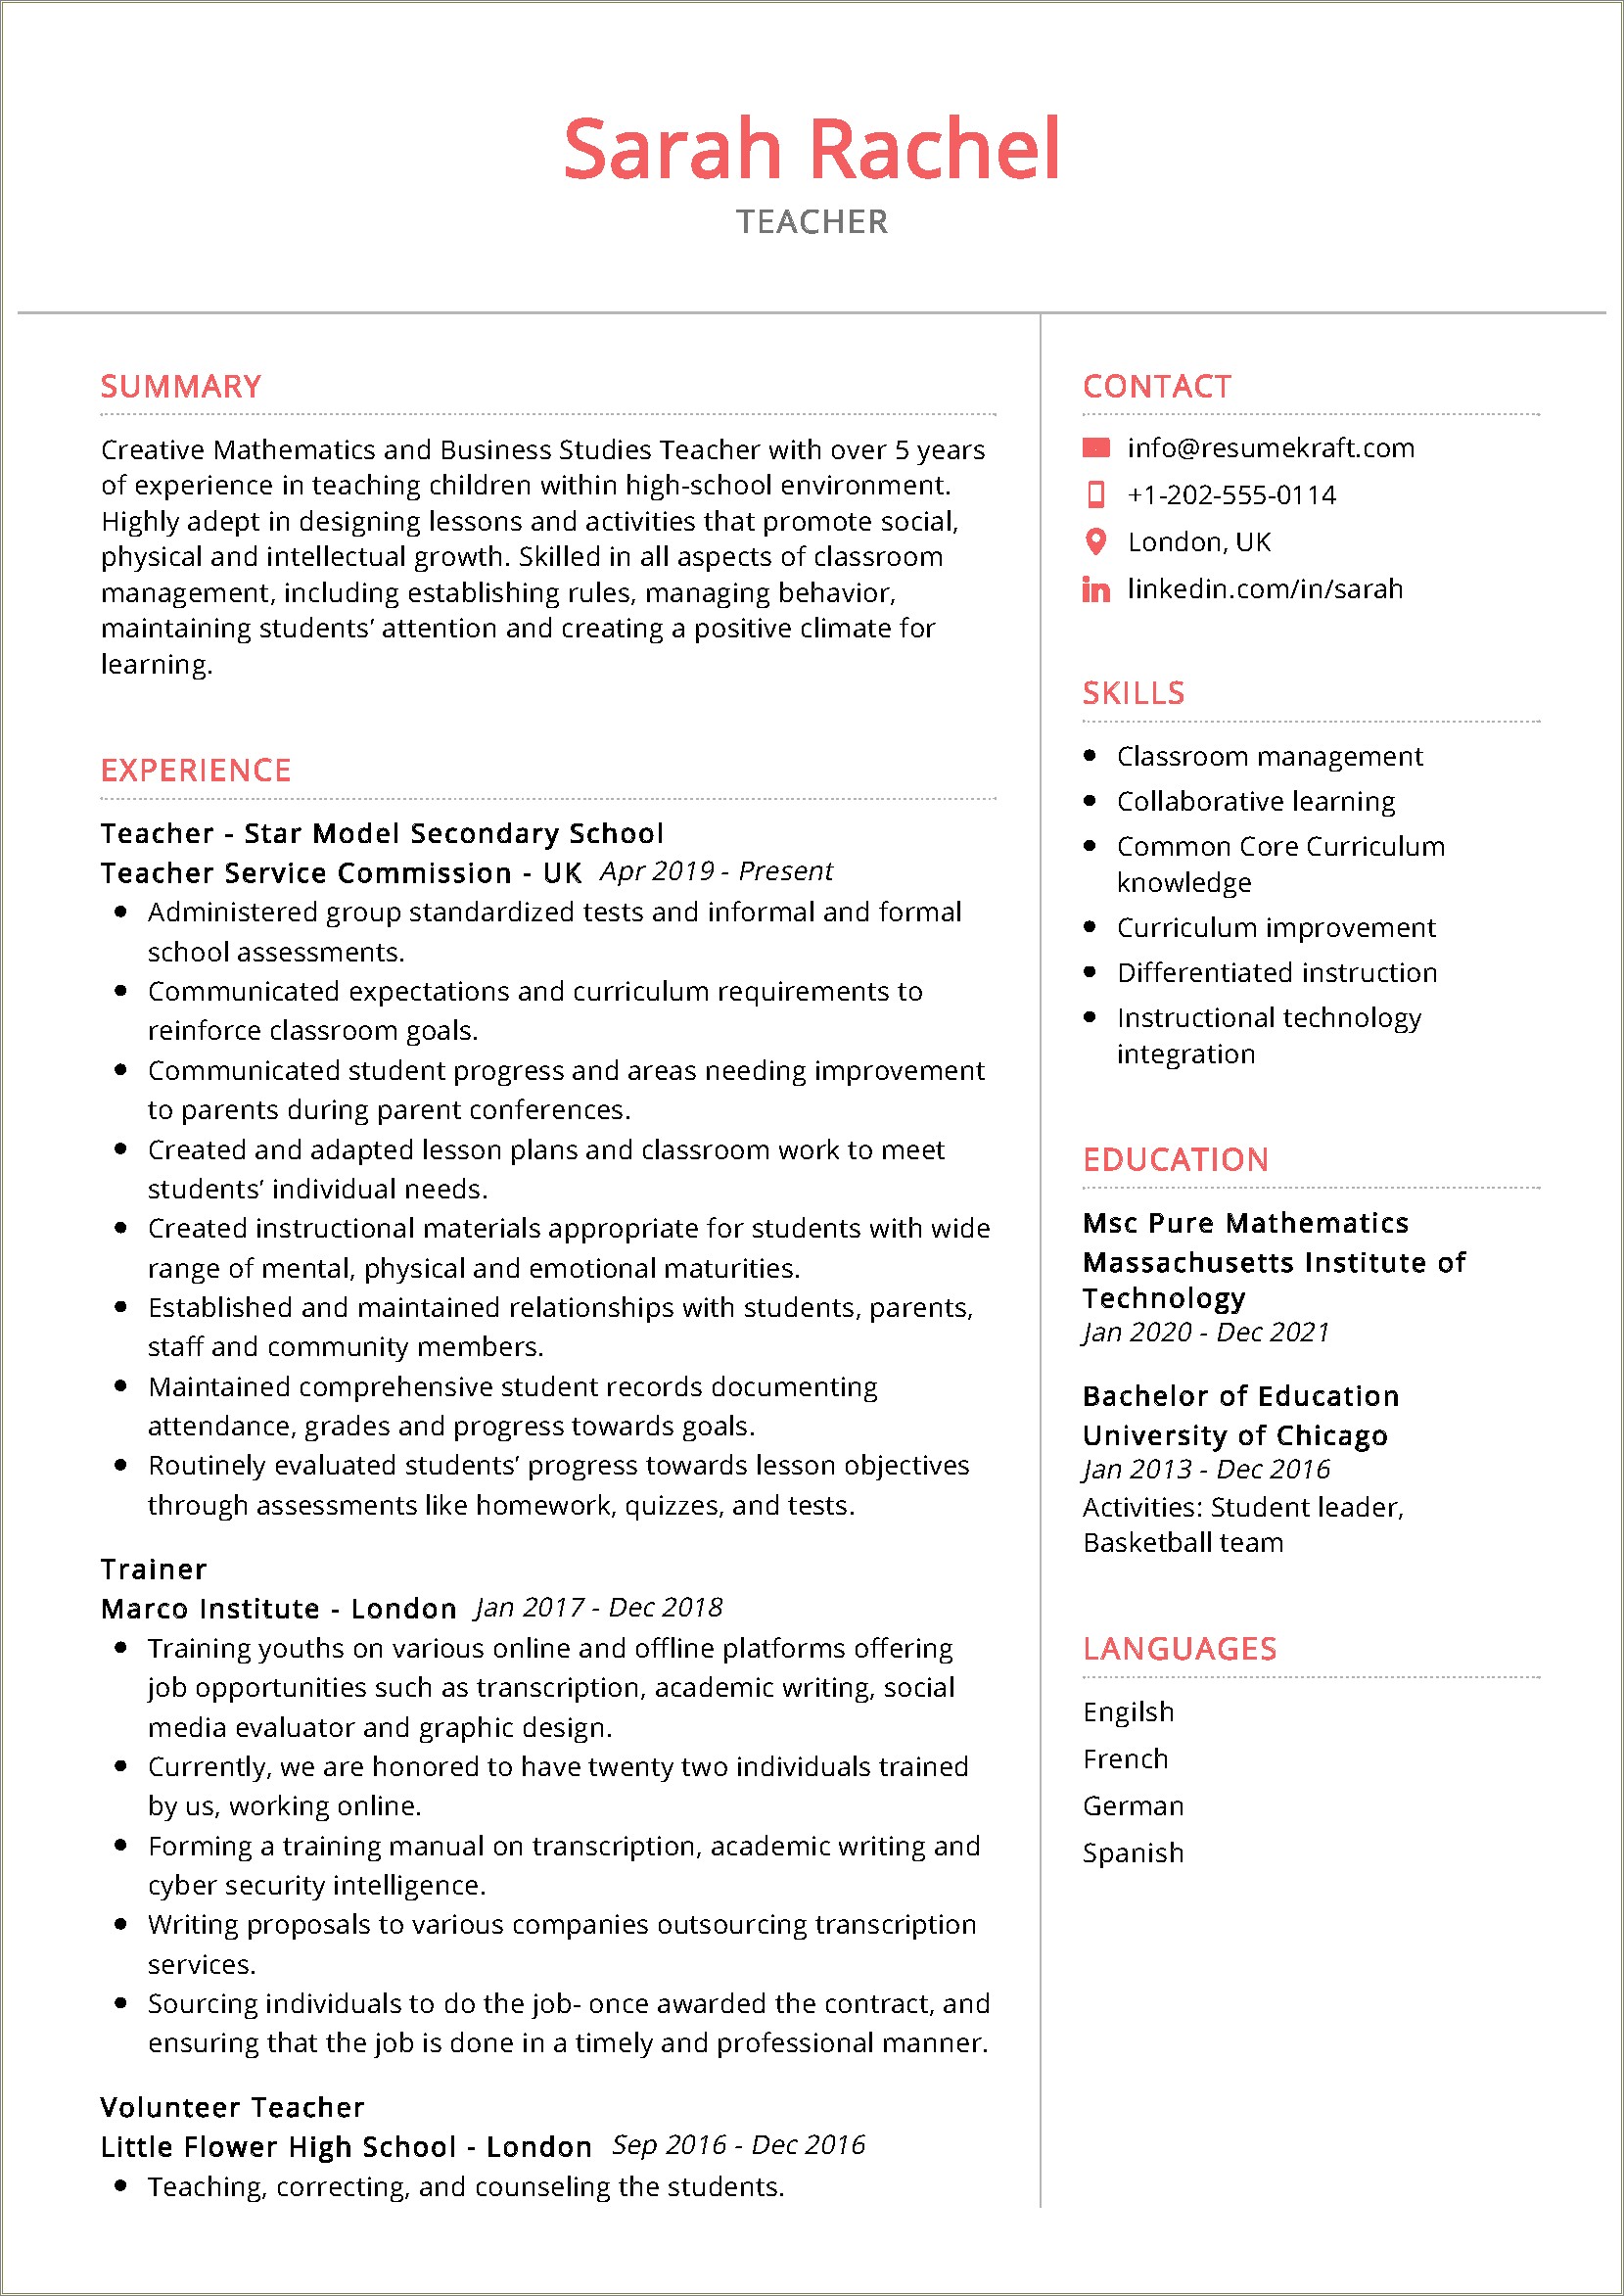 Resume Curriculum For High School Students